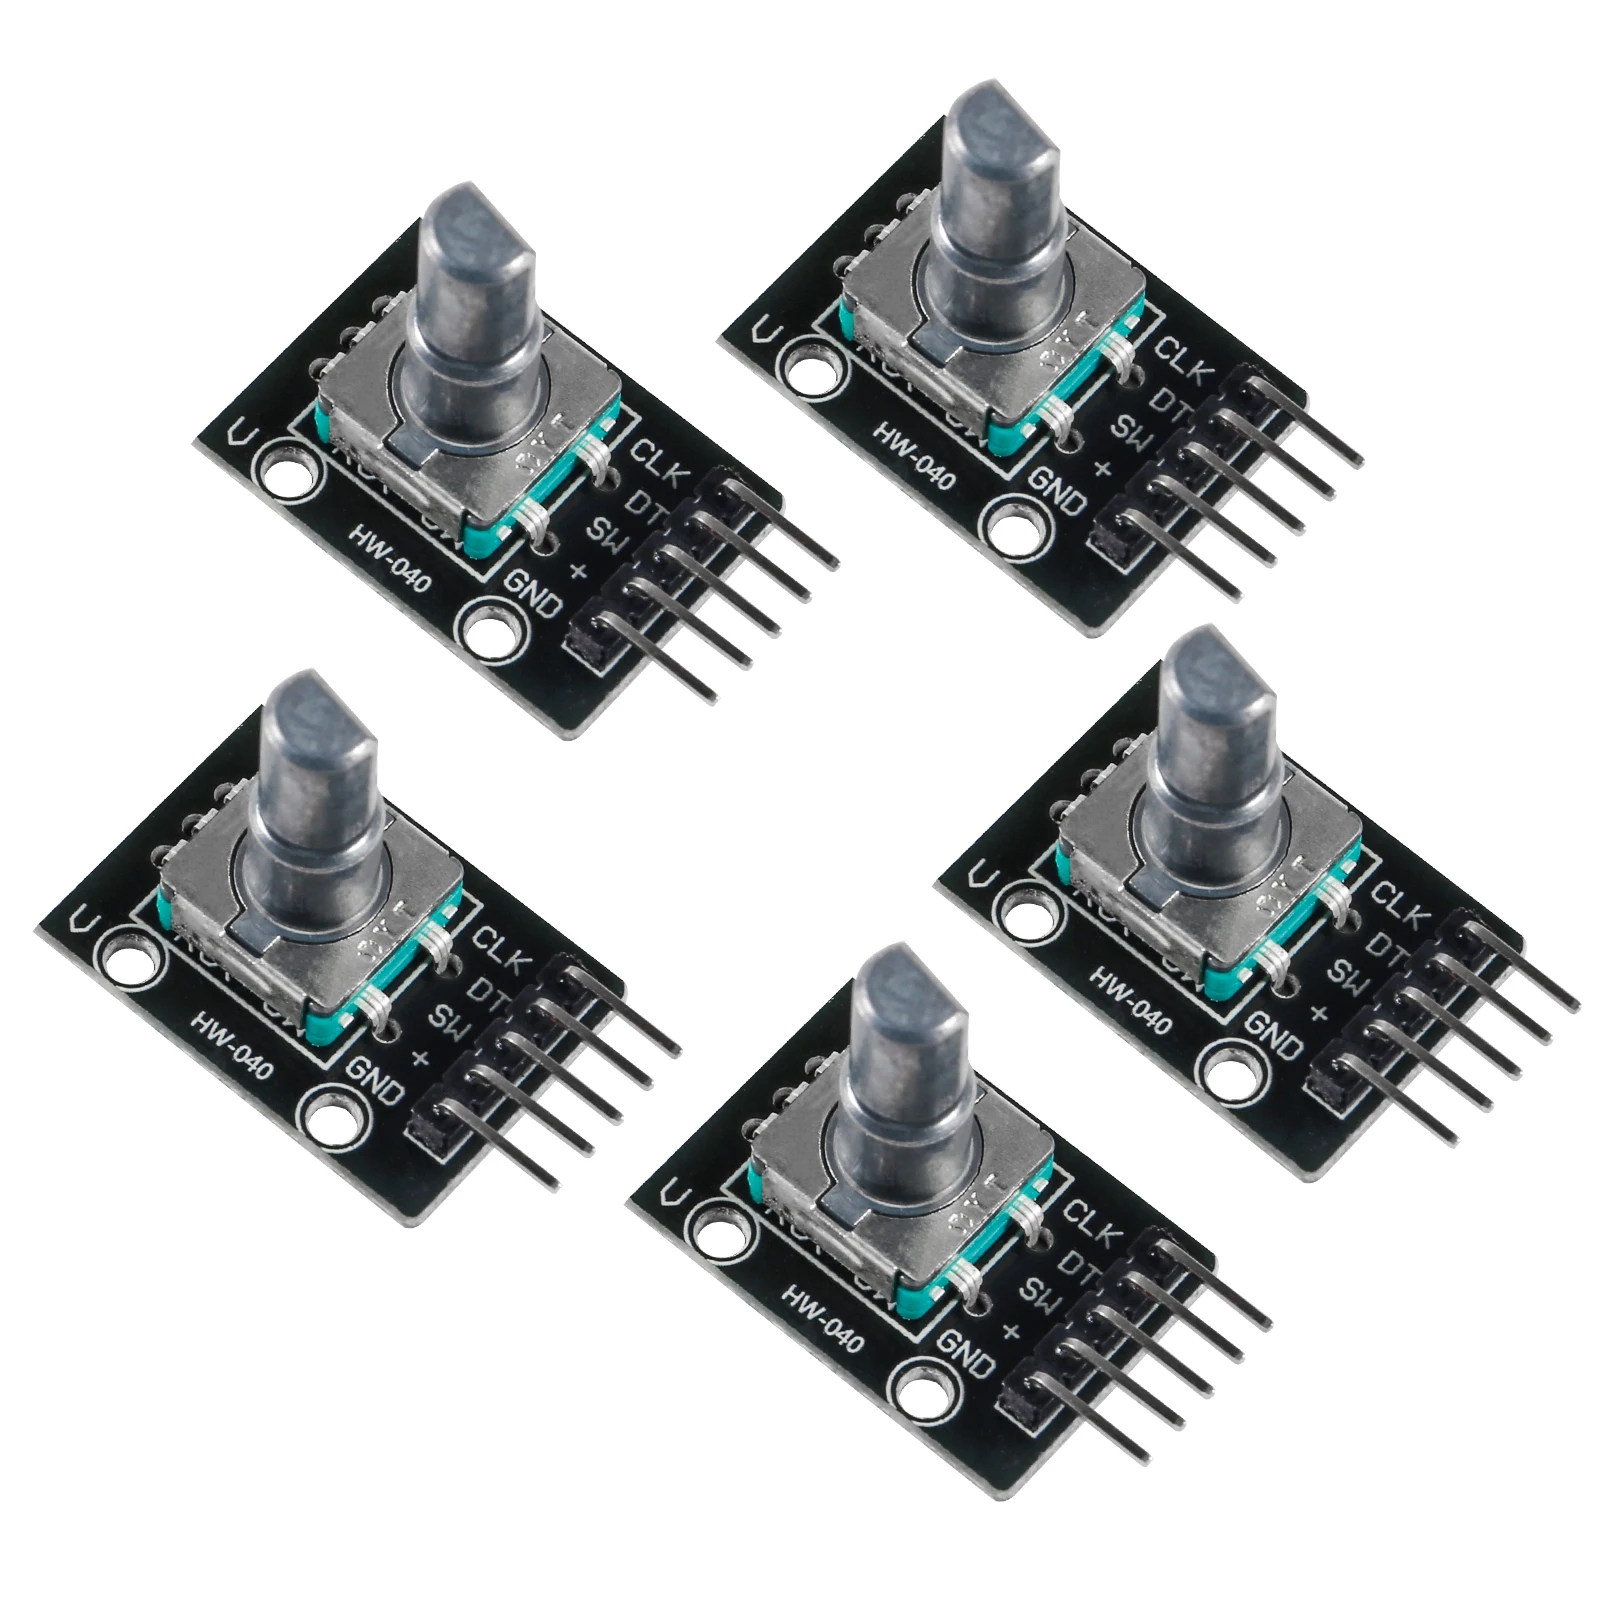 

5Pcs 360 Degrees Rotary Encoder Module For Arduino Brick Sensor Switch Development Board KY-040 With Pins